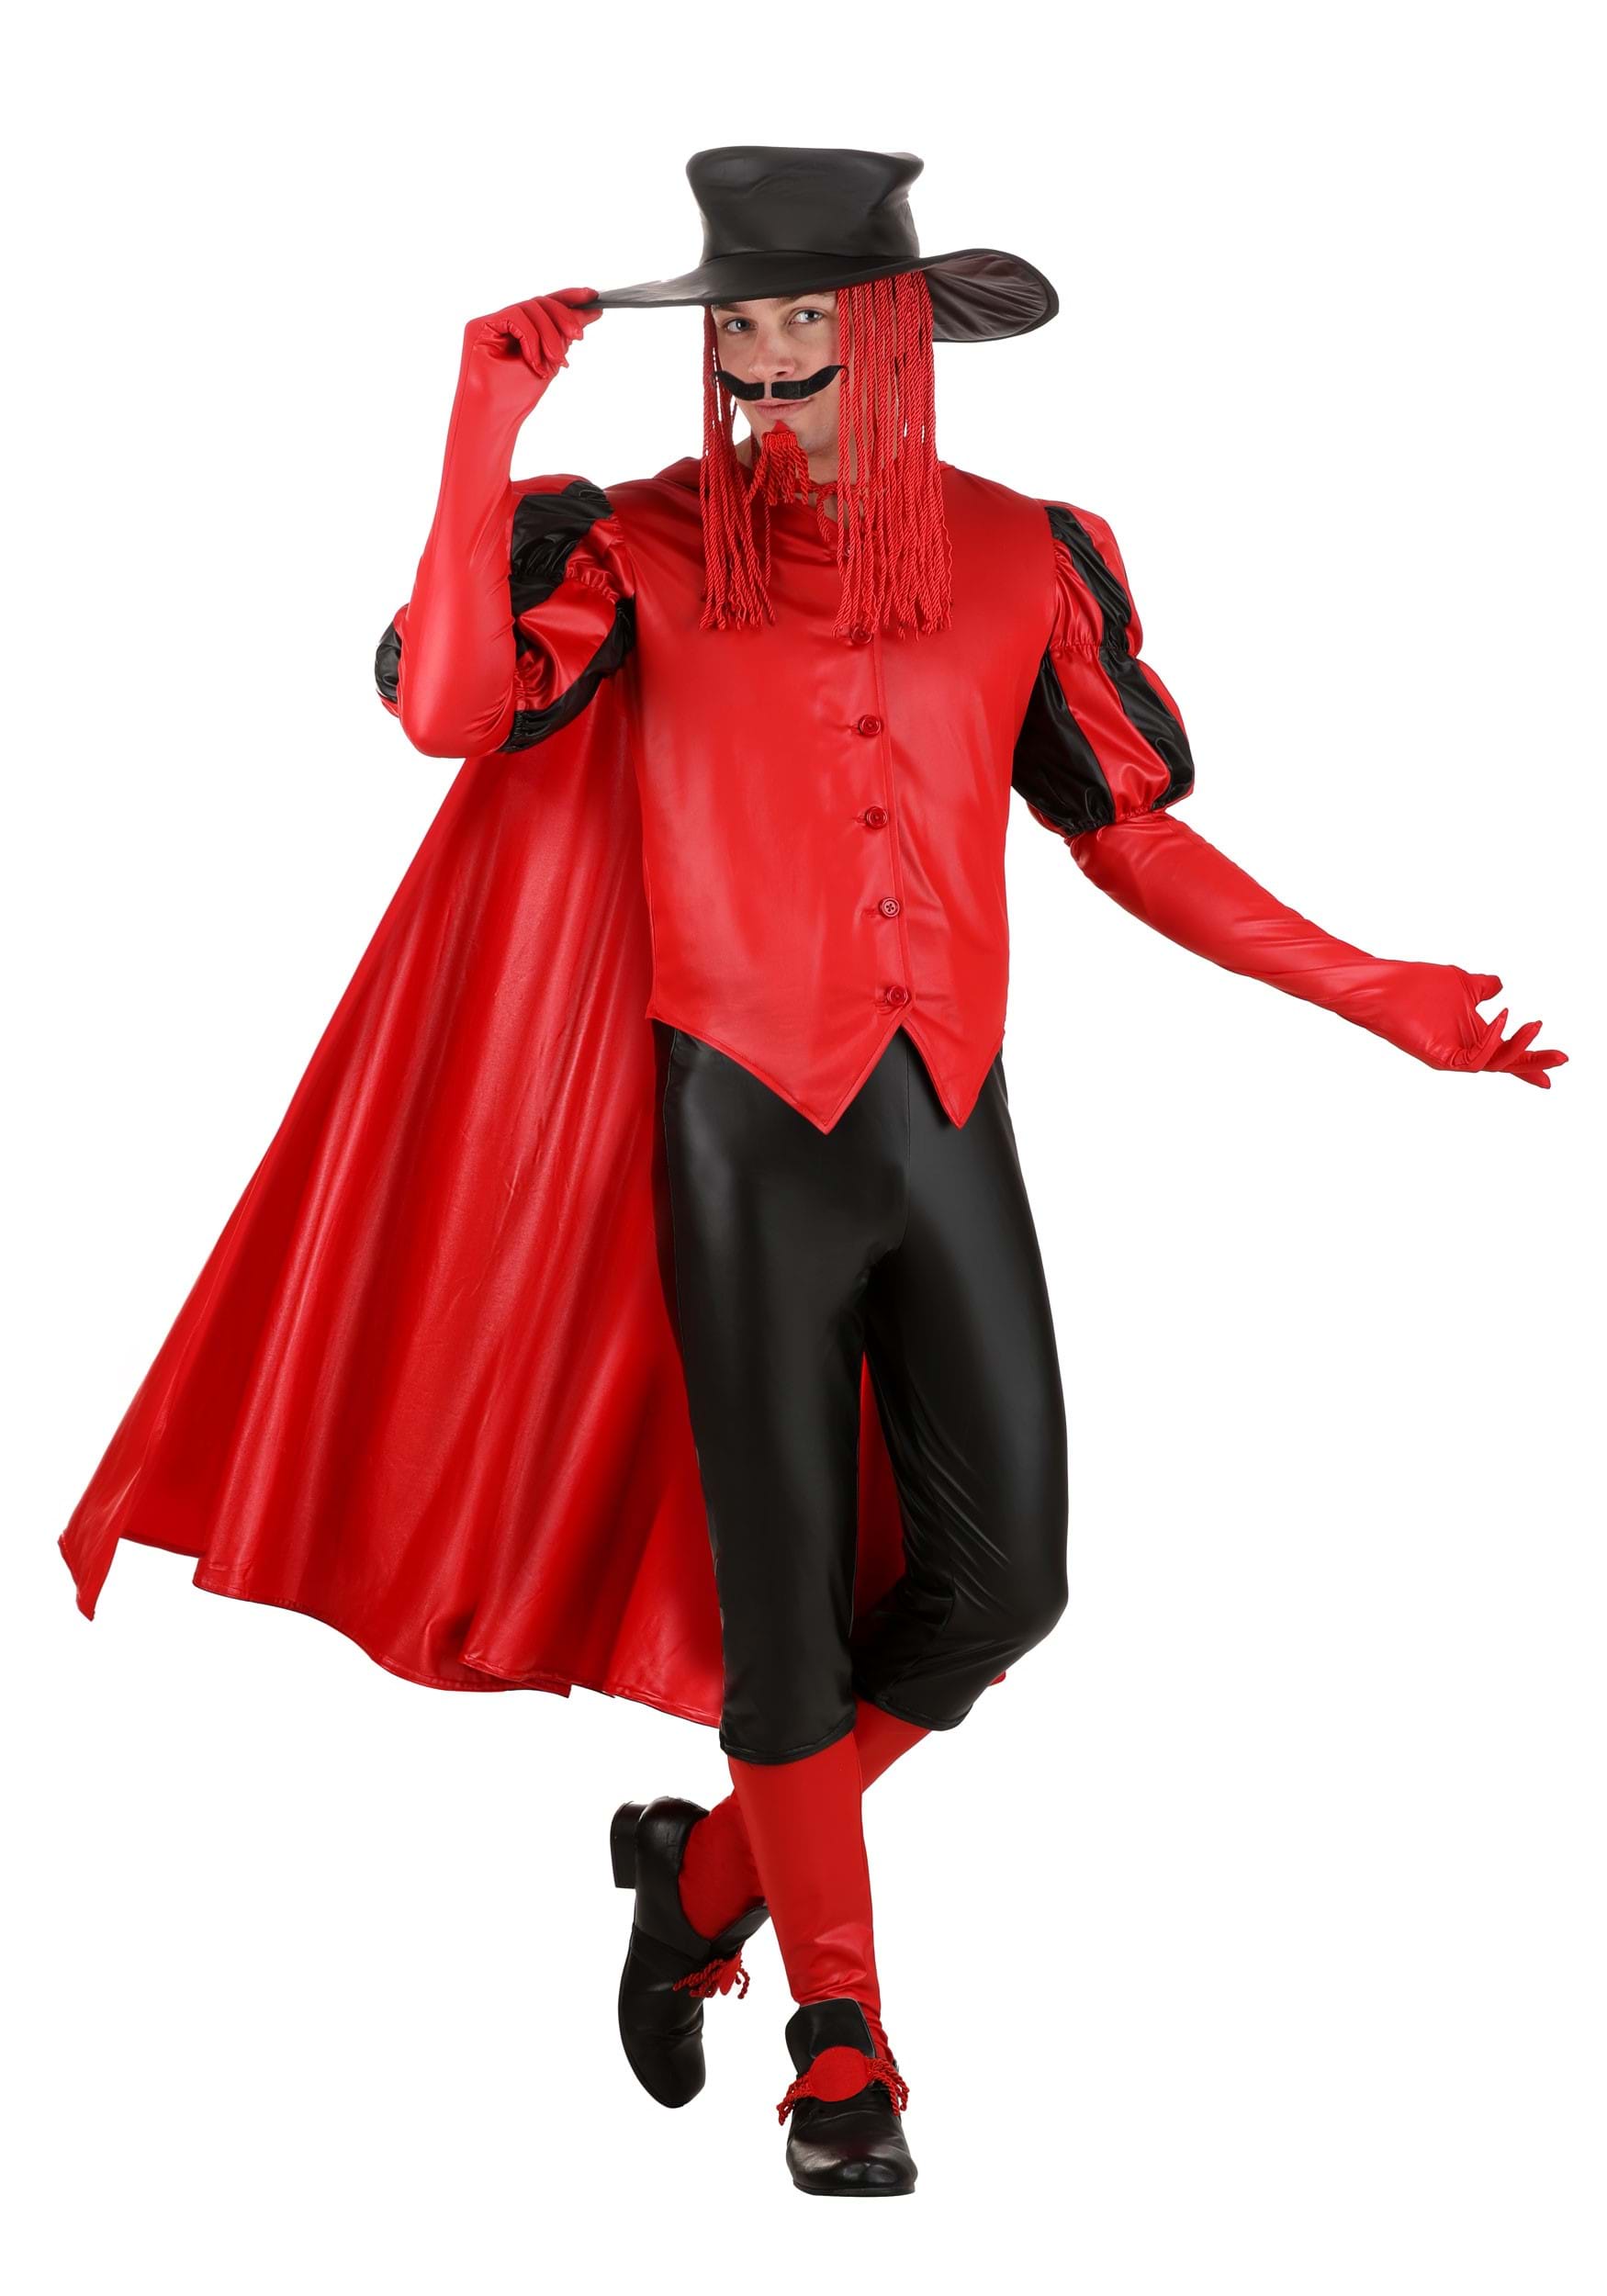 Photos - Fancy Dress Lord FUN Costumes  Licorice Candy Land Costume for Adults Black/Red FUN 